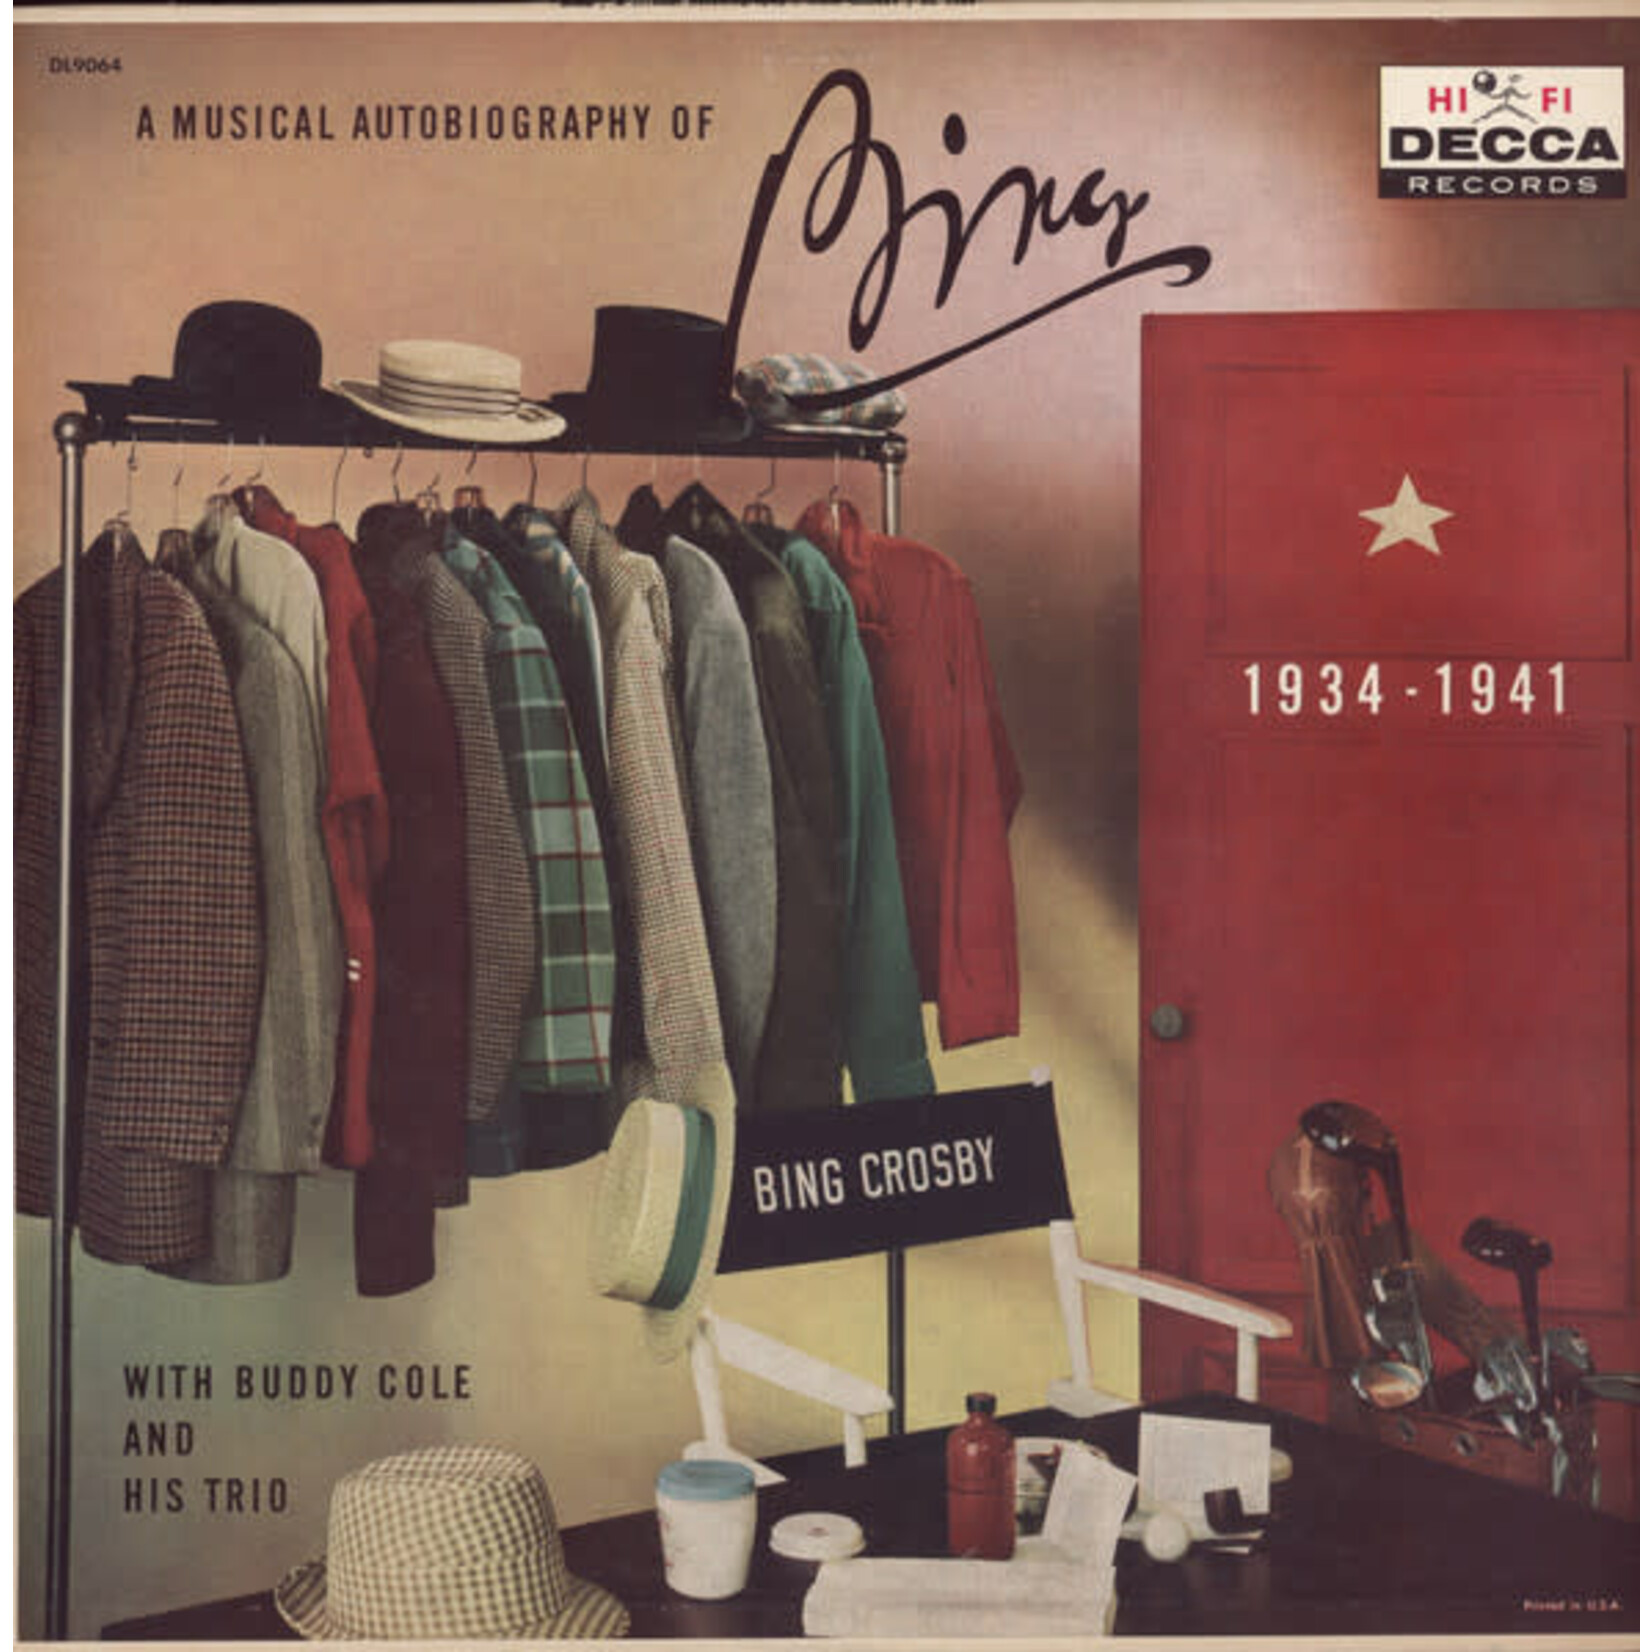 Bing Crosby Bing Crosby With Buddy Cole And His Trio – A Musical Autobiography Of Bing 1934-1941 (VG, 1958, LP, Decca – DL 9064)